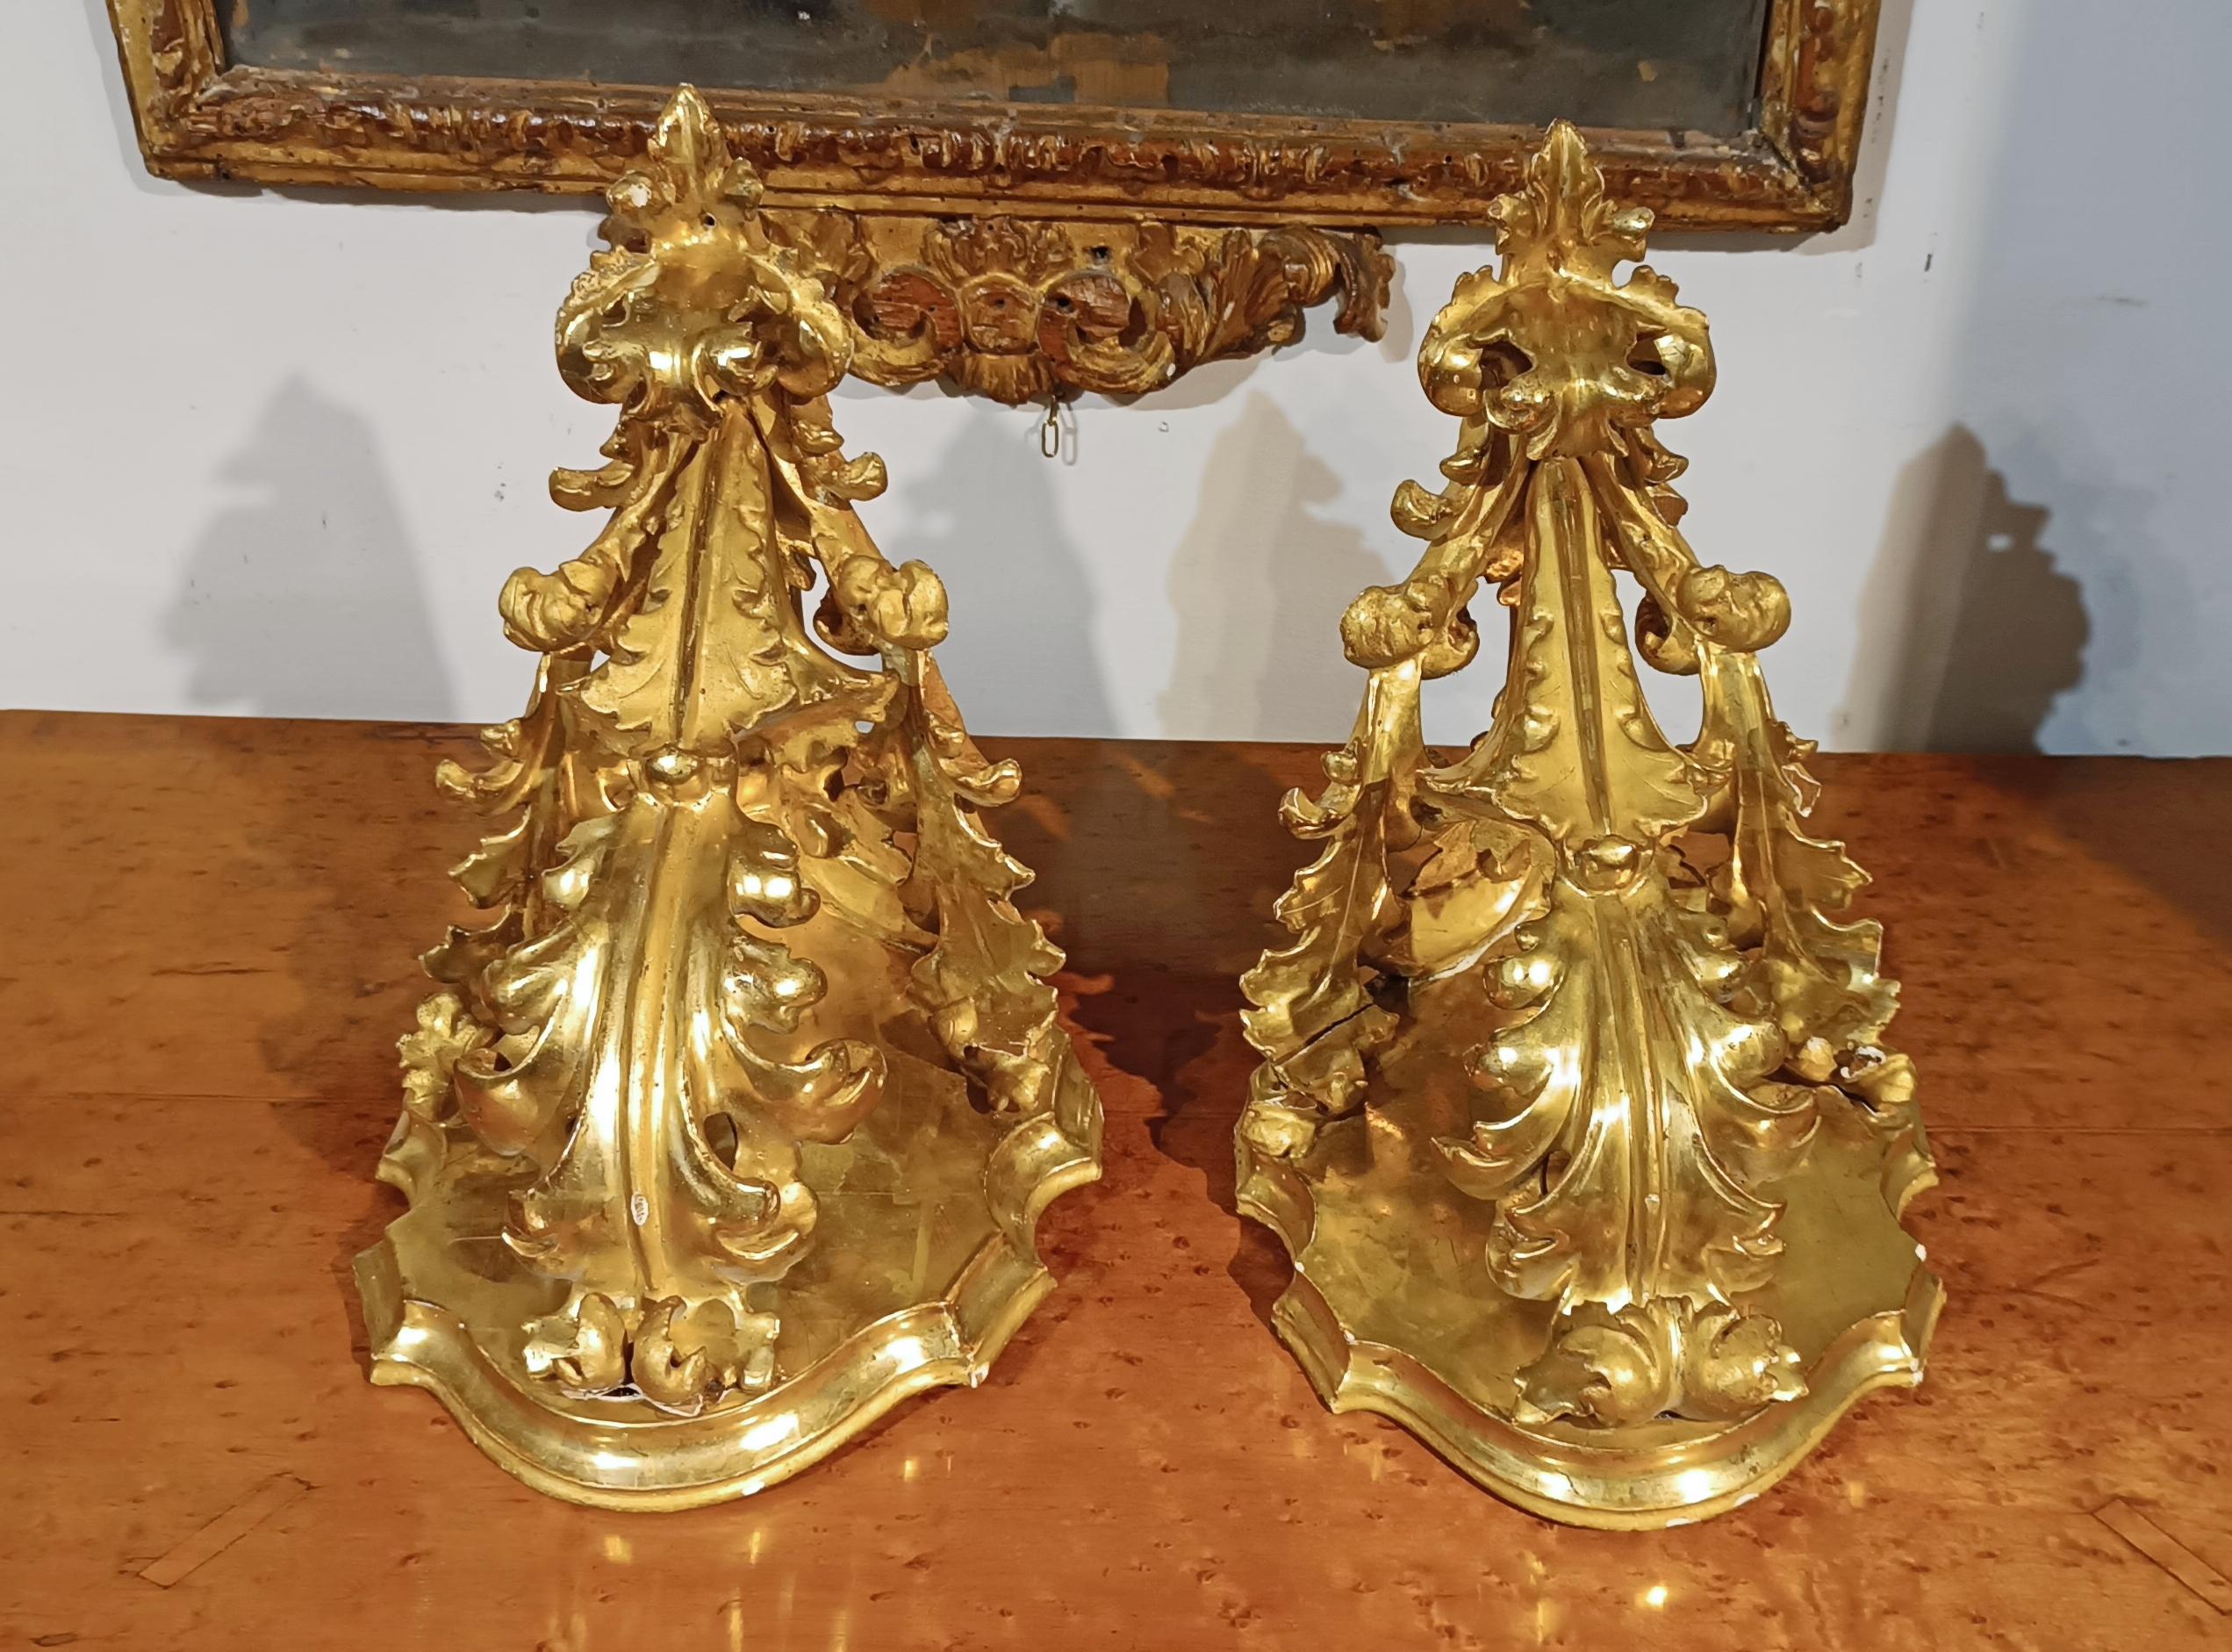 These two corner little shelves in carved pine wood gilded with pure gold leaf represent a valuable and refined work of Florentine manufacturing from the mid-19th century. Made with high craftsmanship, these shelves combine the functionality of an